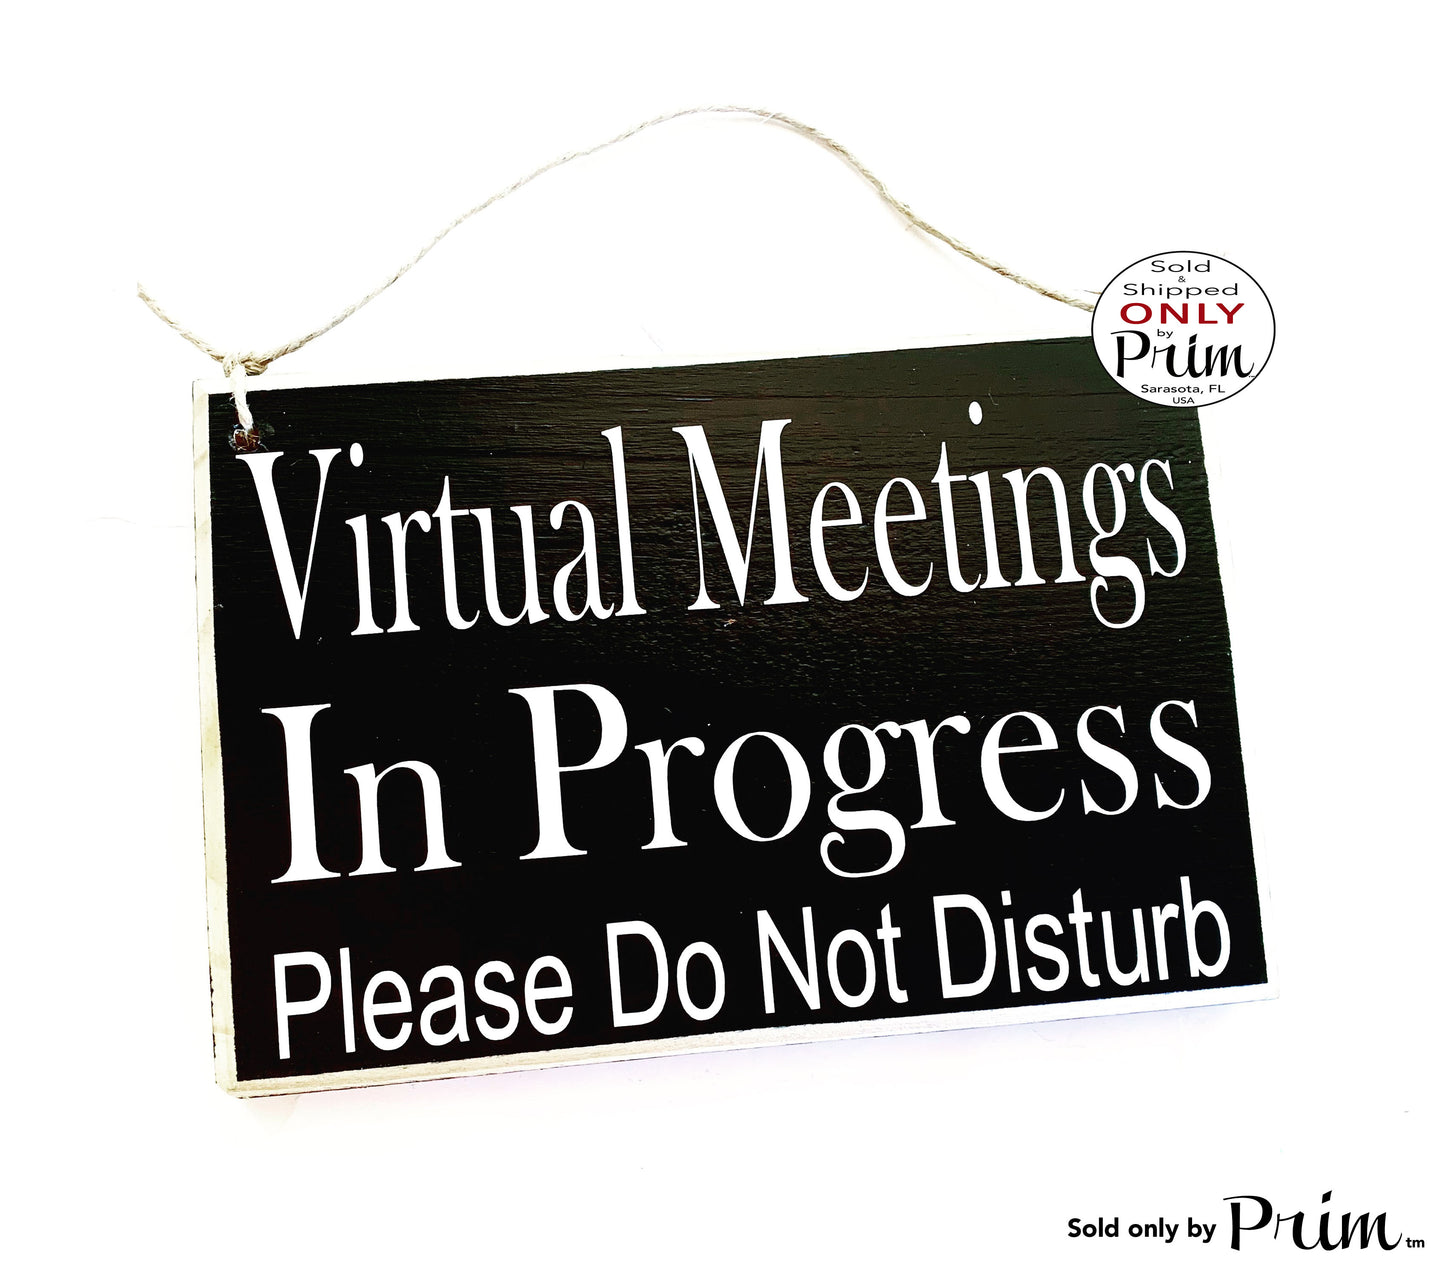 8x6 Virtual Meeting In Progress Please Do Not Disturb Custom Wood Sign | Home Office Working From Home Busy In Session Progress Door Plaque